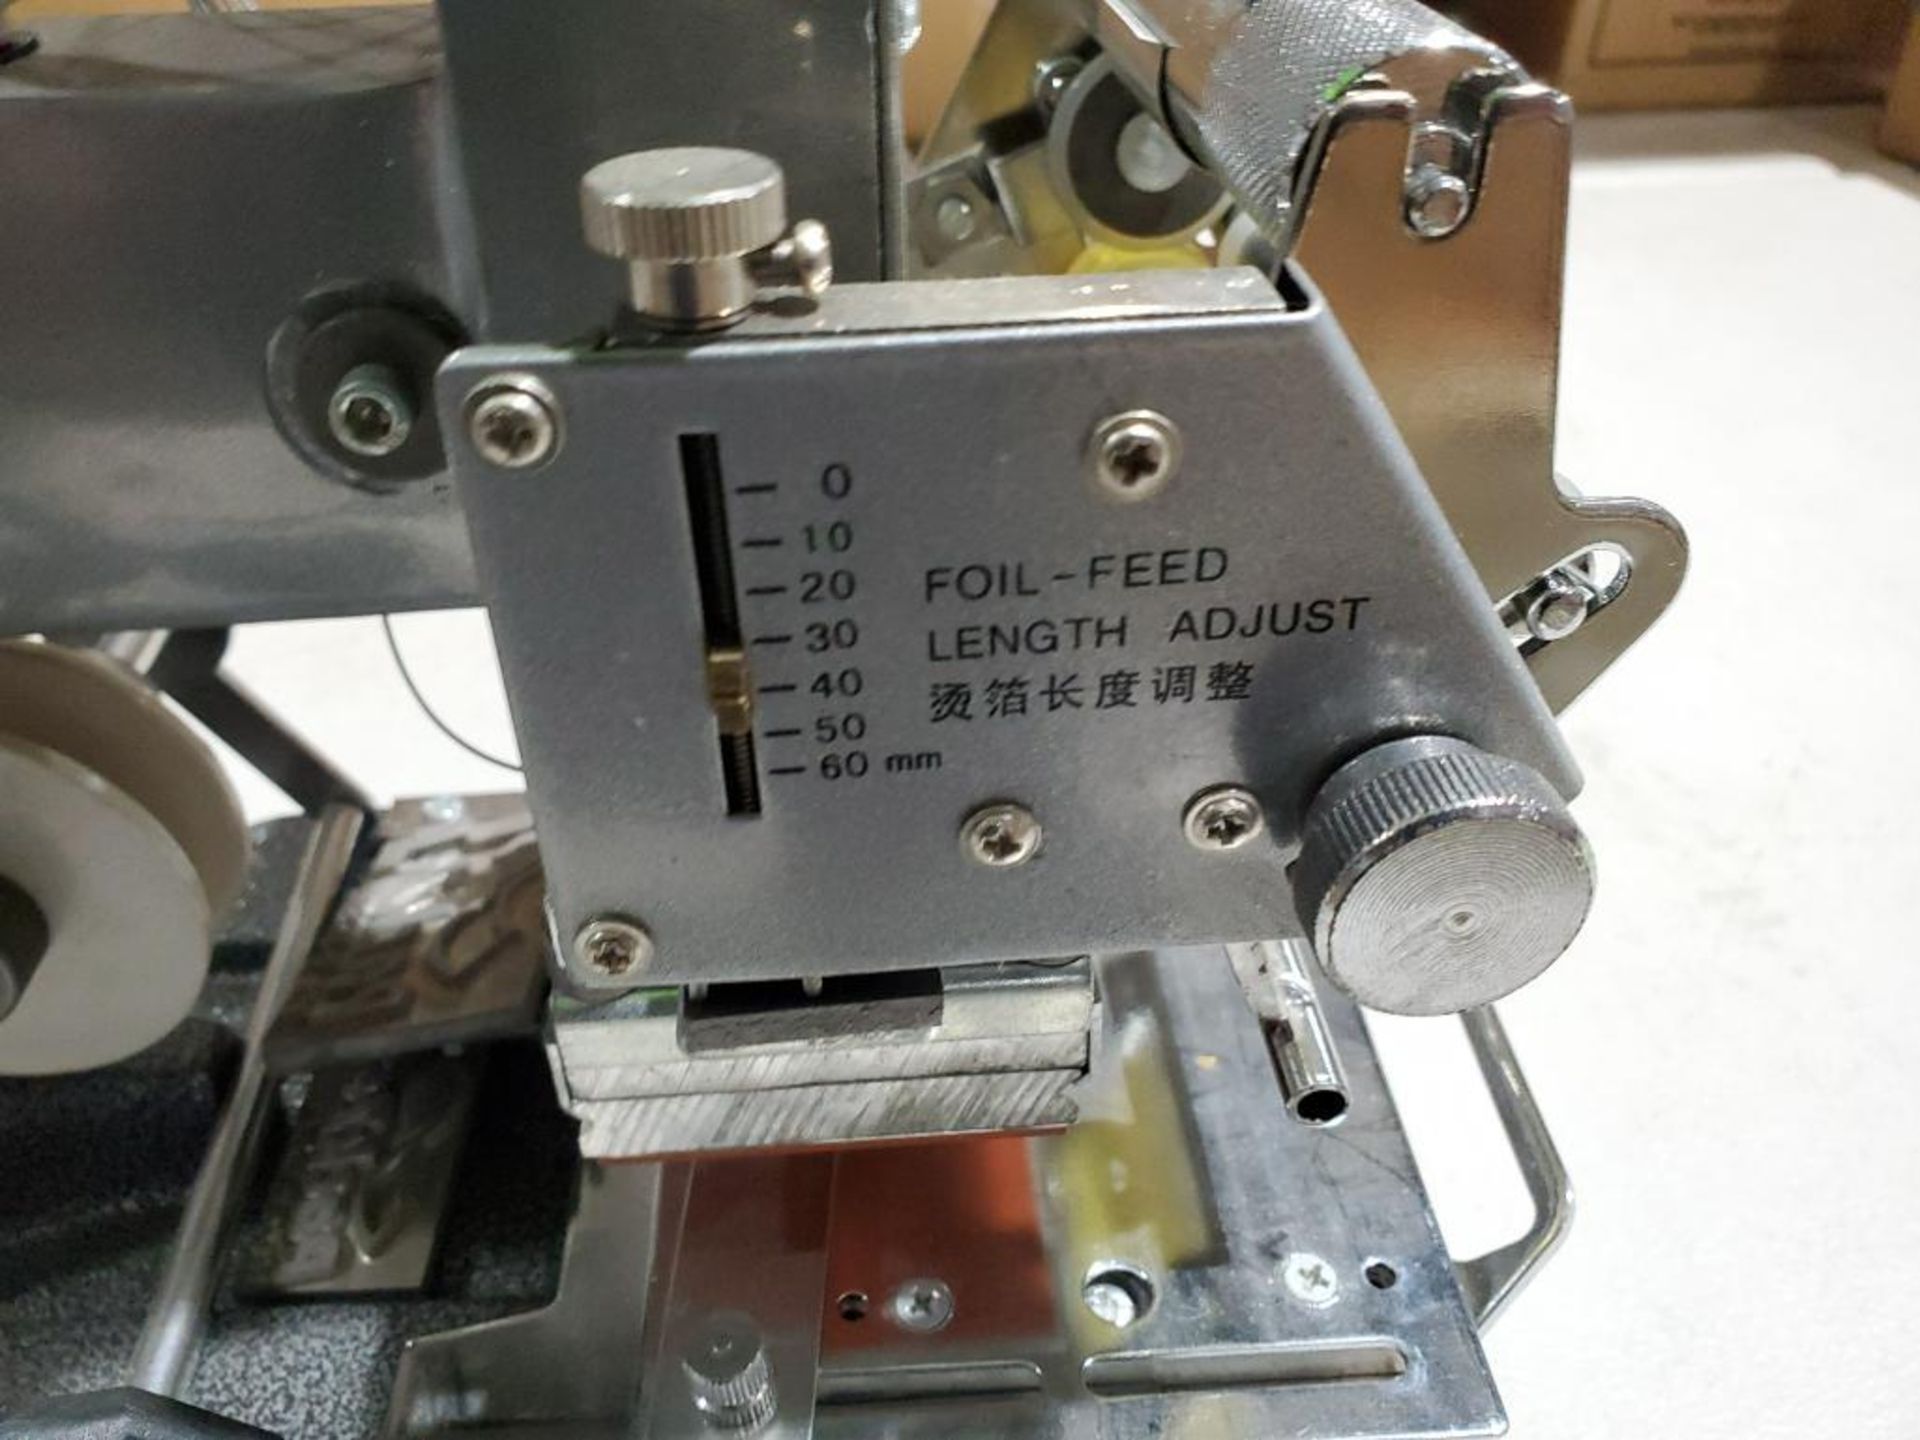 Silver hot foil stamping machine. Part number TJ-90A. - Image 5 of 7